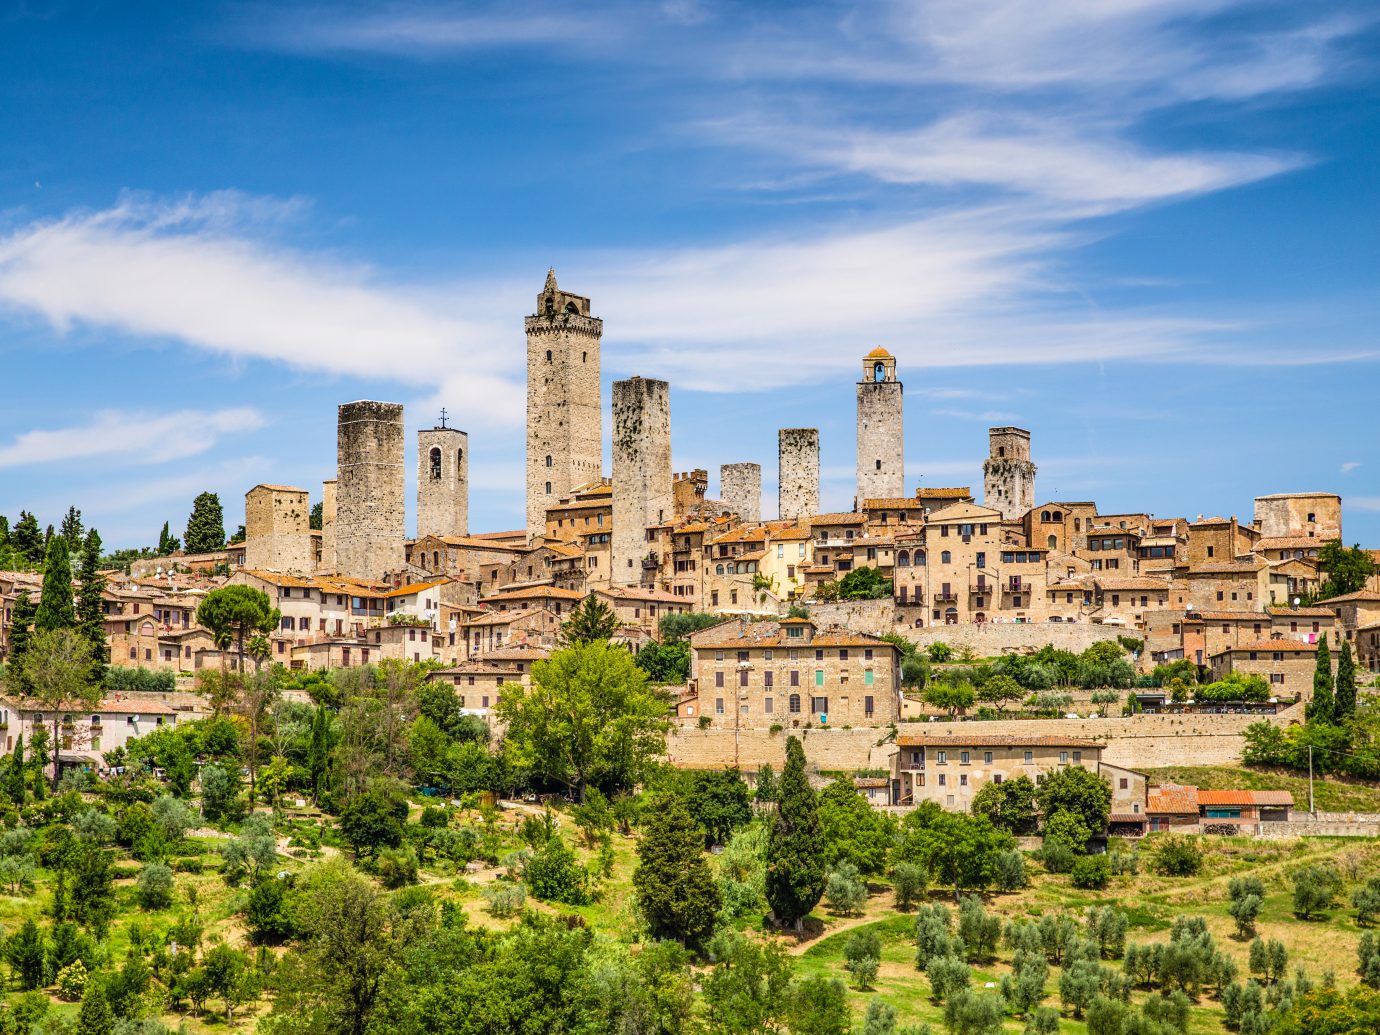 Beautiful view of the medieval town of San Gimignano, Tuscany, Italy.